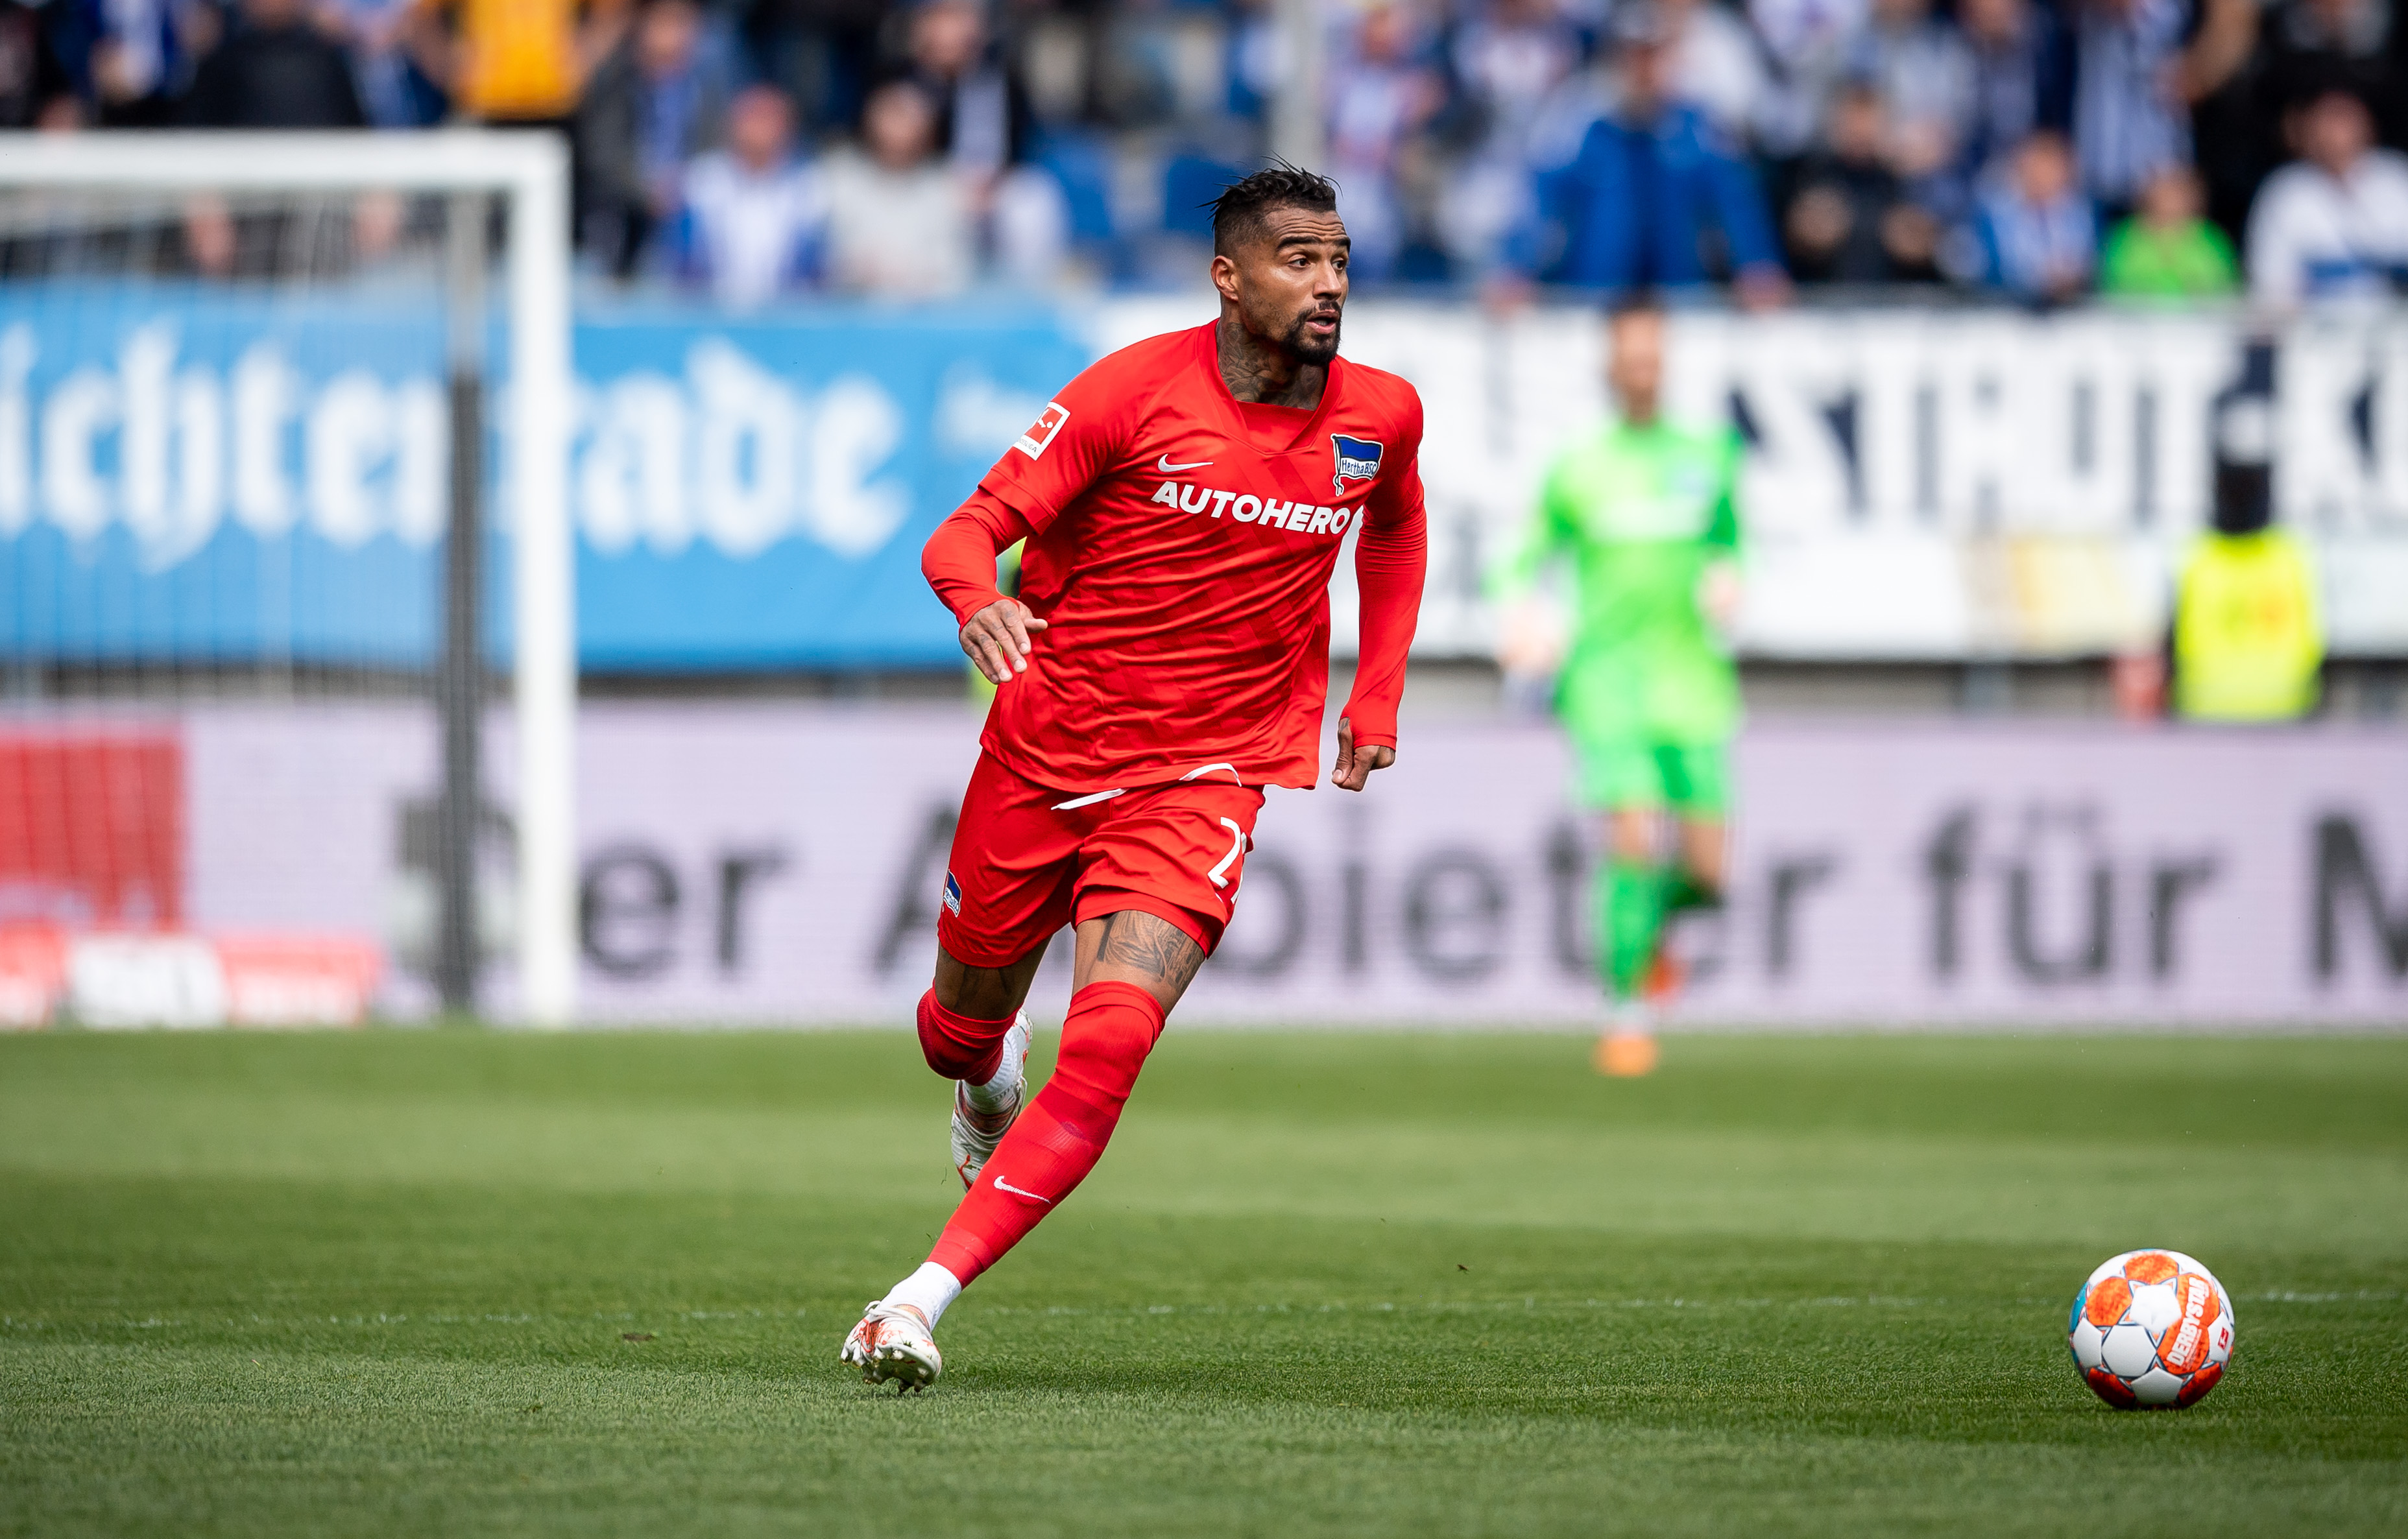 Prince Boateng on the ball in Bielefeld.